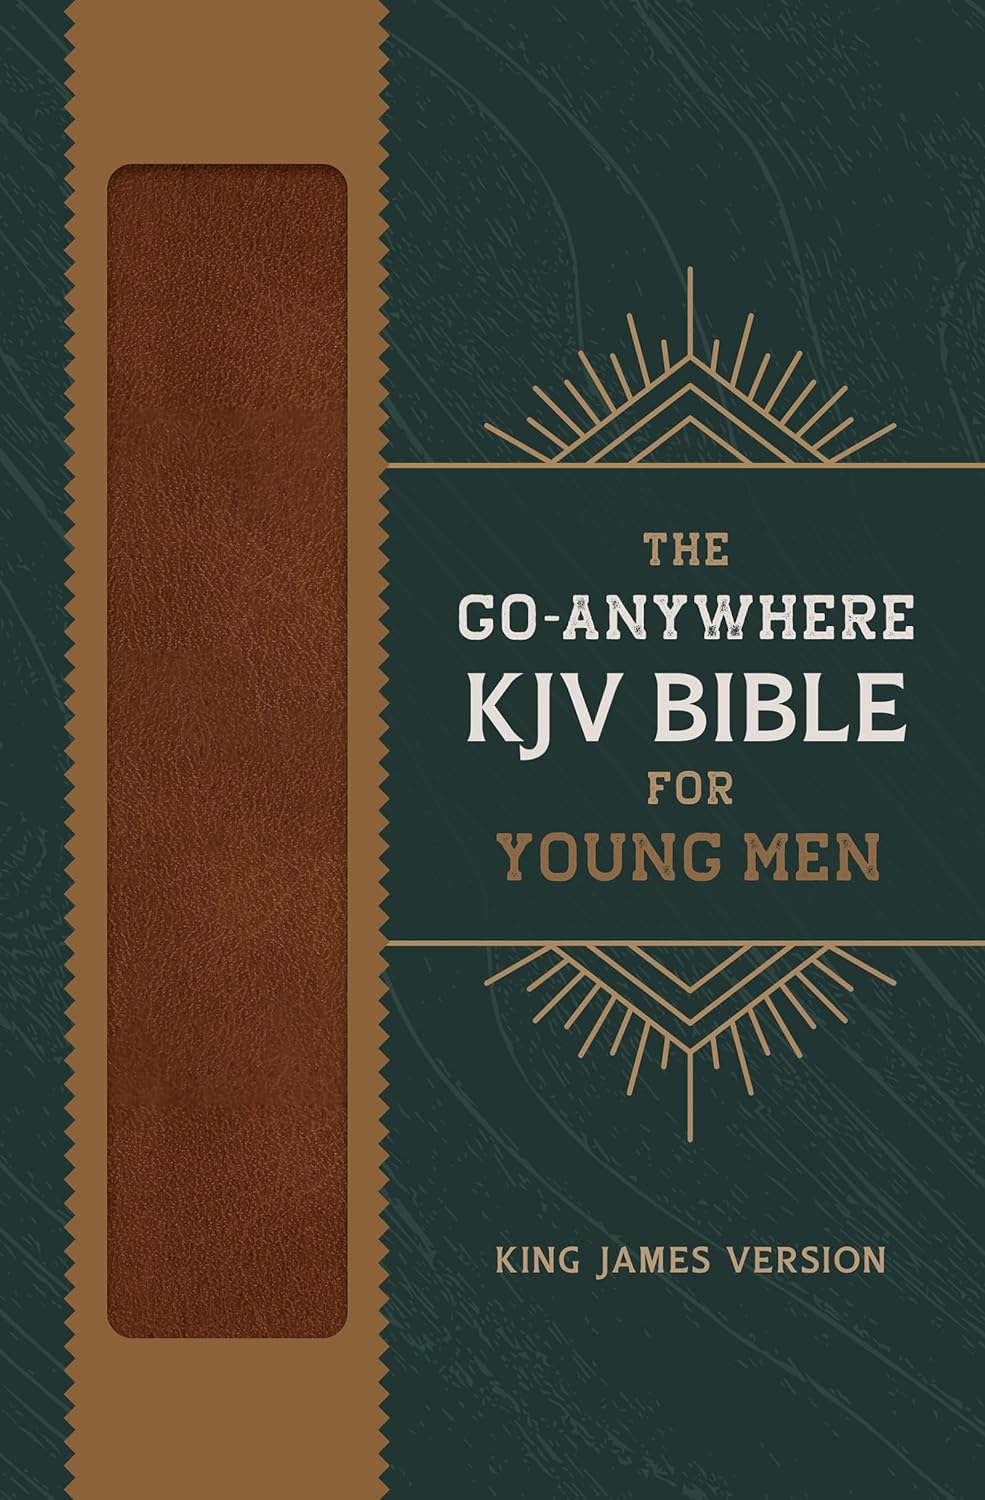 The Go Anywhere KJV Bible for Young Men